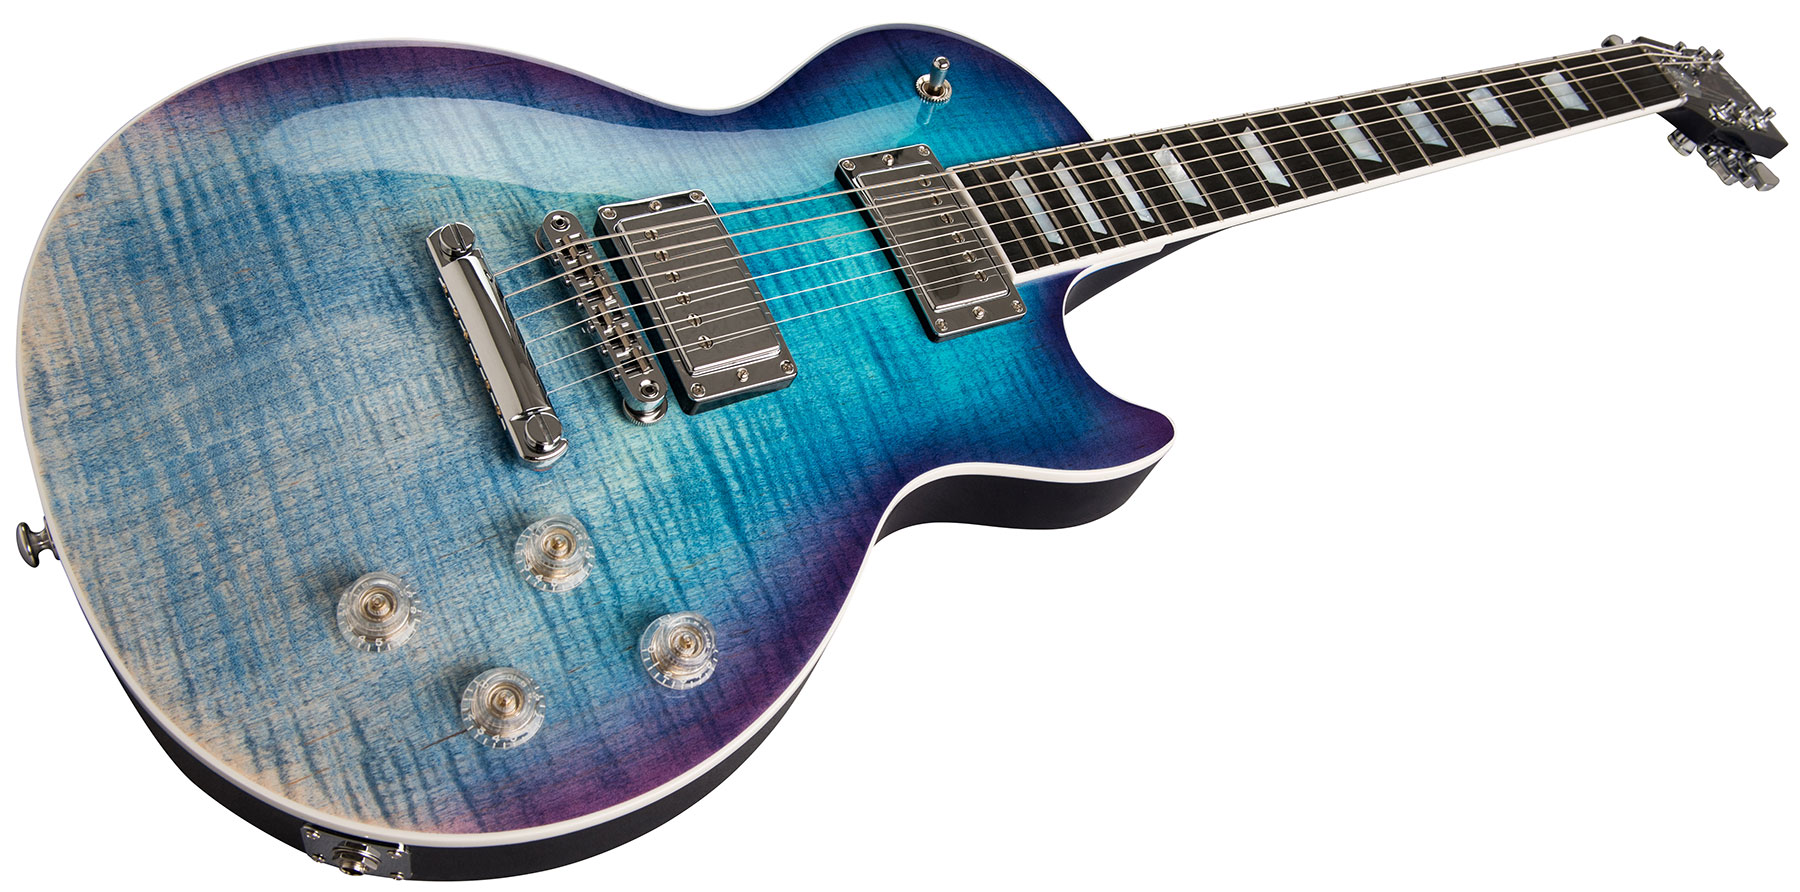 Gibson Les Paul Hp-ii High Performance 2019 Hh Ht Rw - Blueberry Fade - Single cut electric guitar - Variation 1